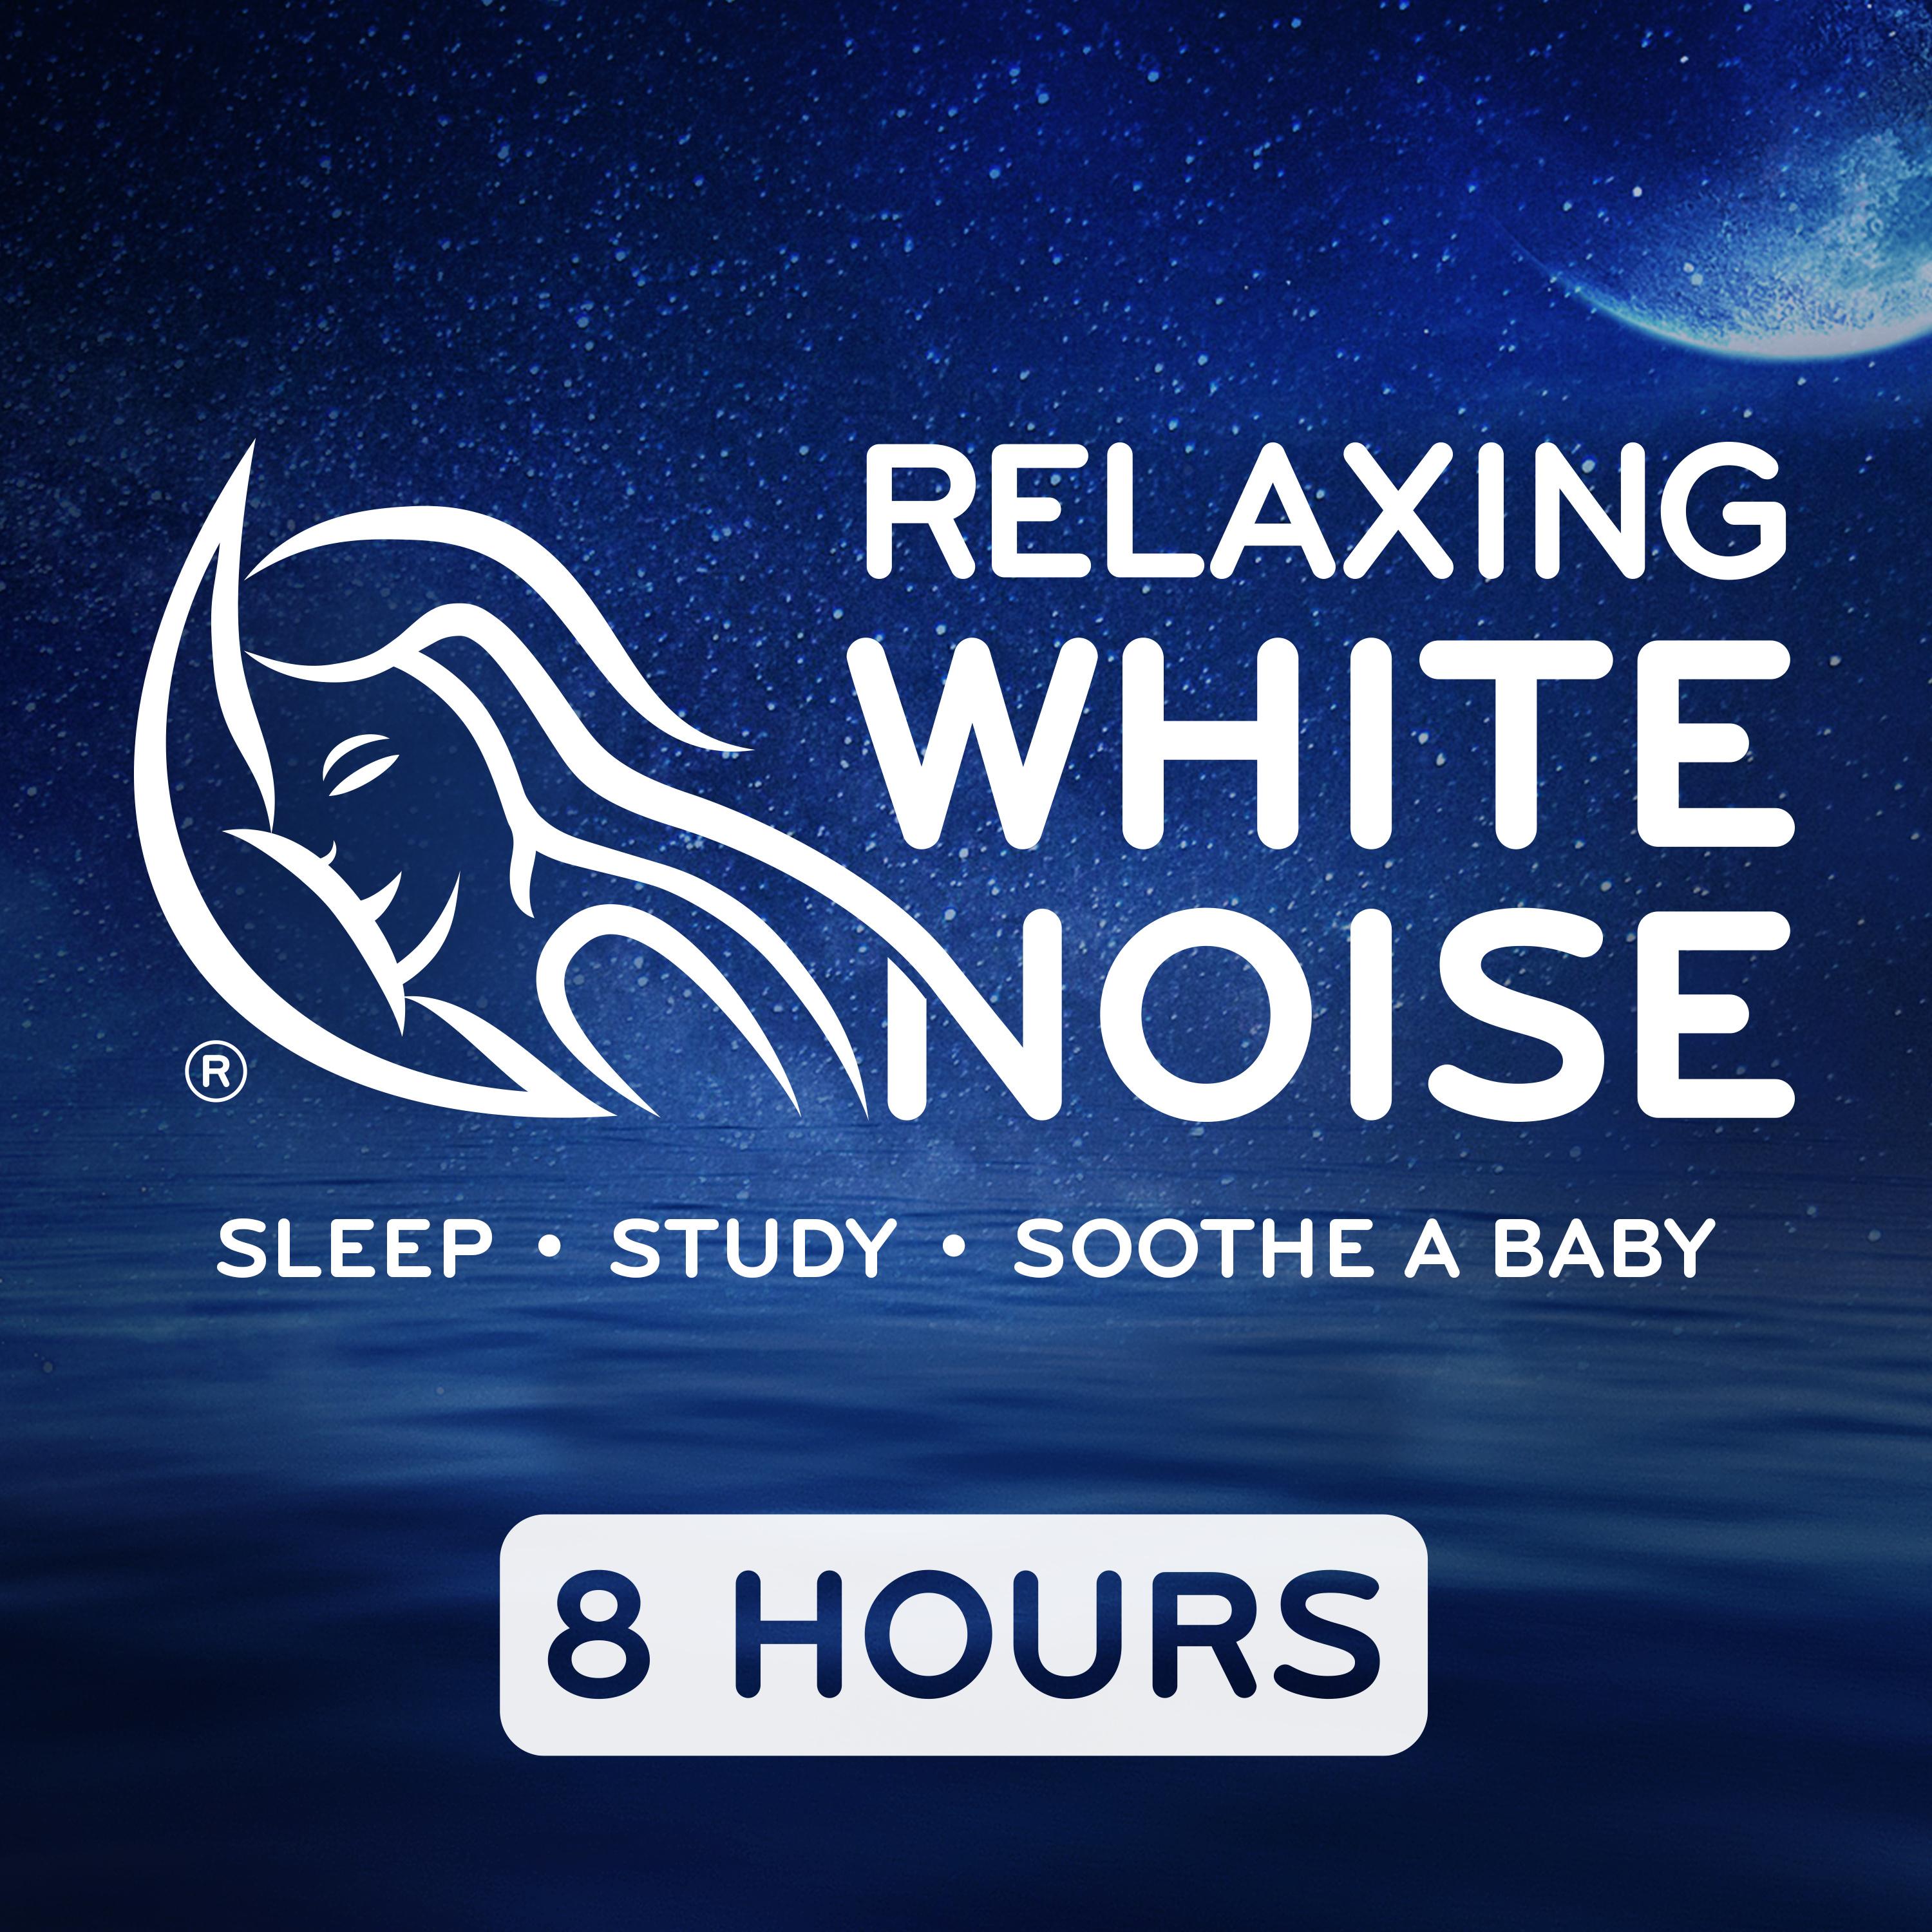 Baby Sleeps To Sound of Waves 8 Hours | Water White Noise for Restless Infant